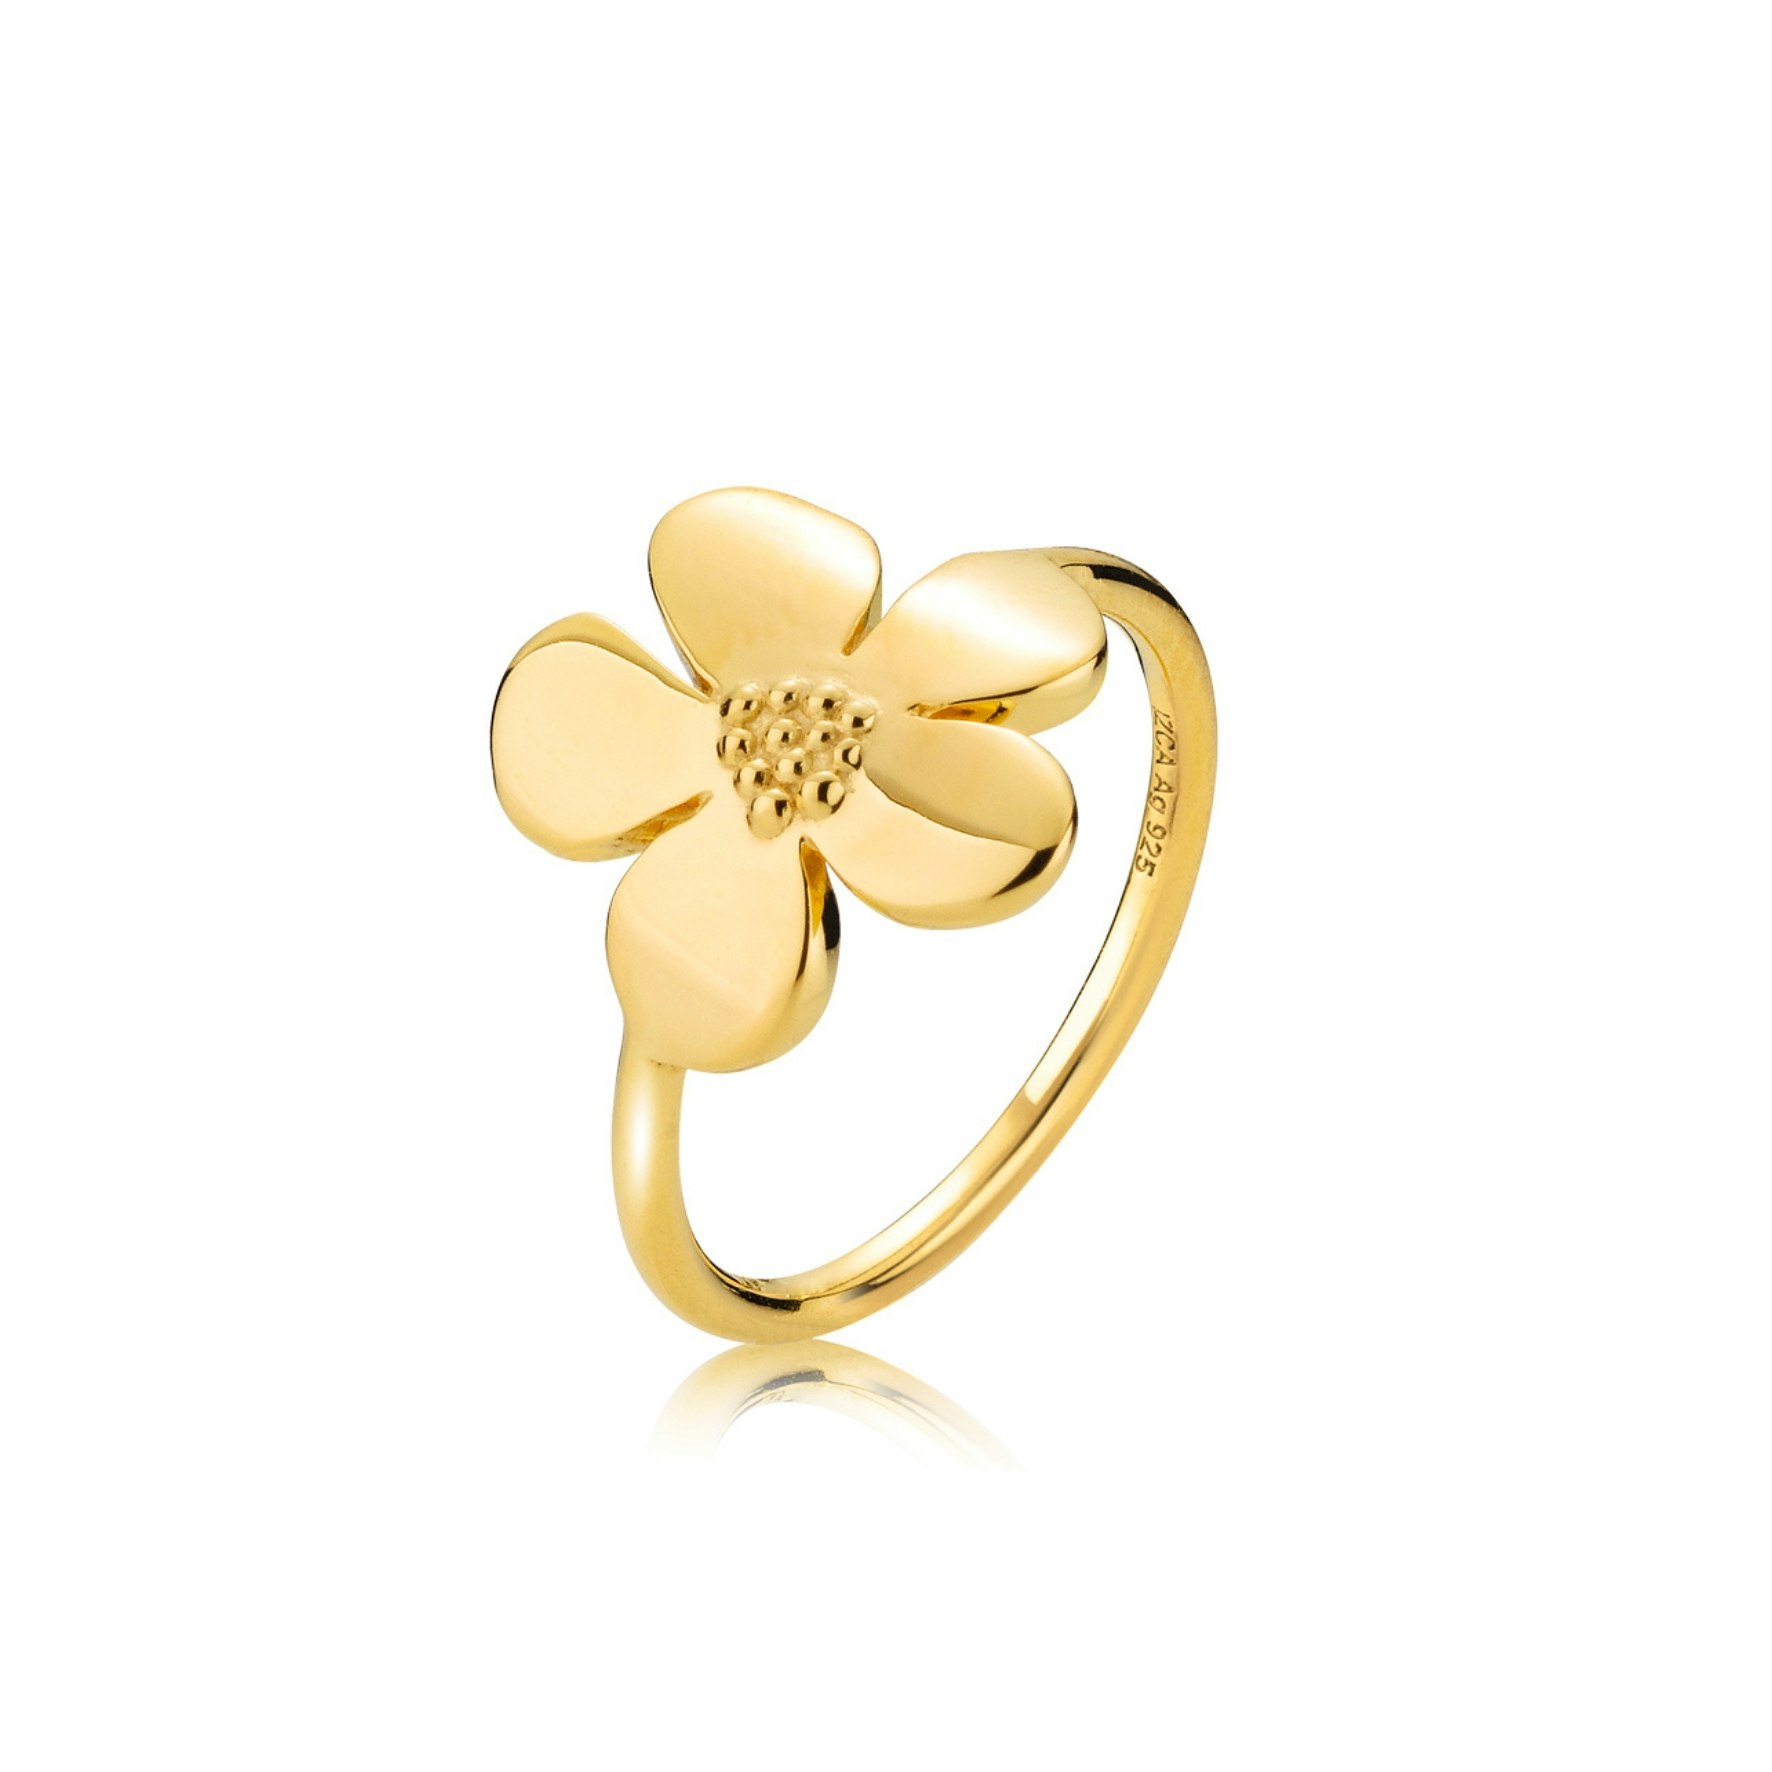 Pansy Ring from Izabel Camille in Goldplated Silver Sterling 925